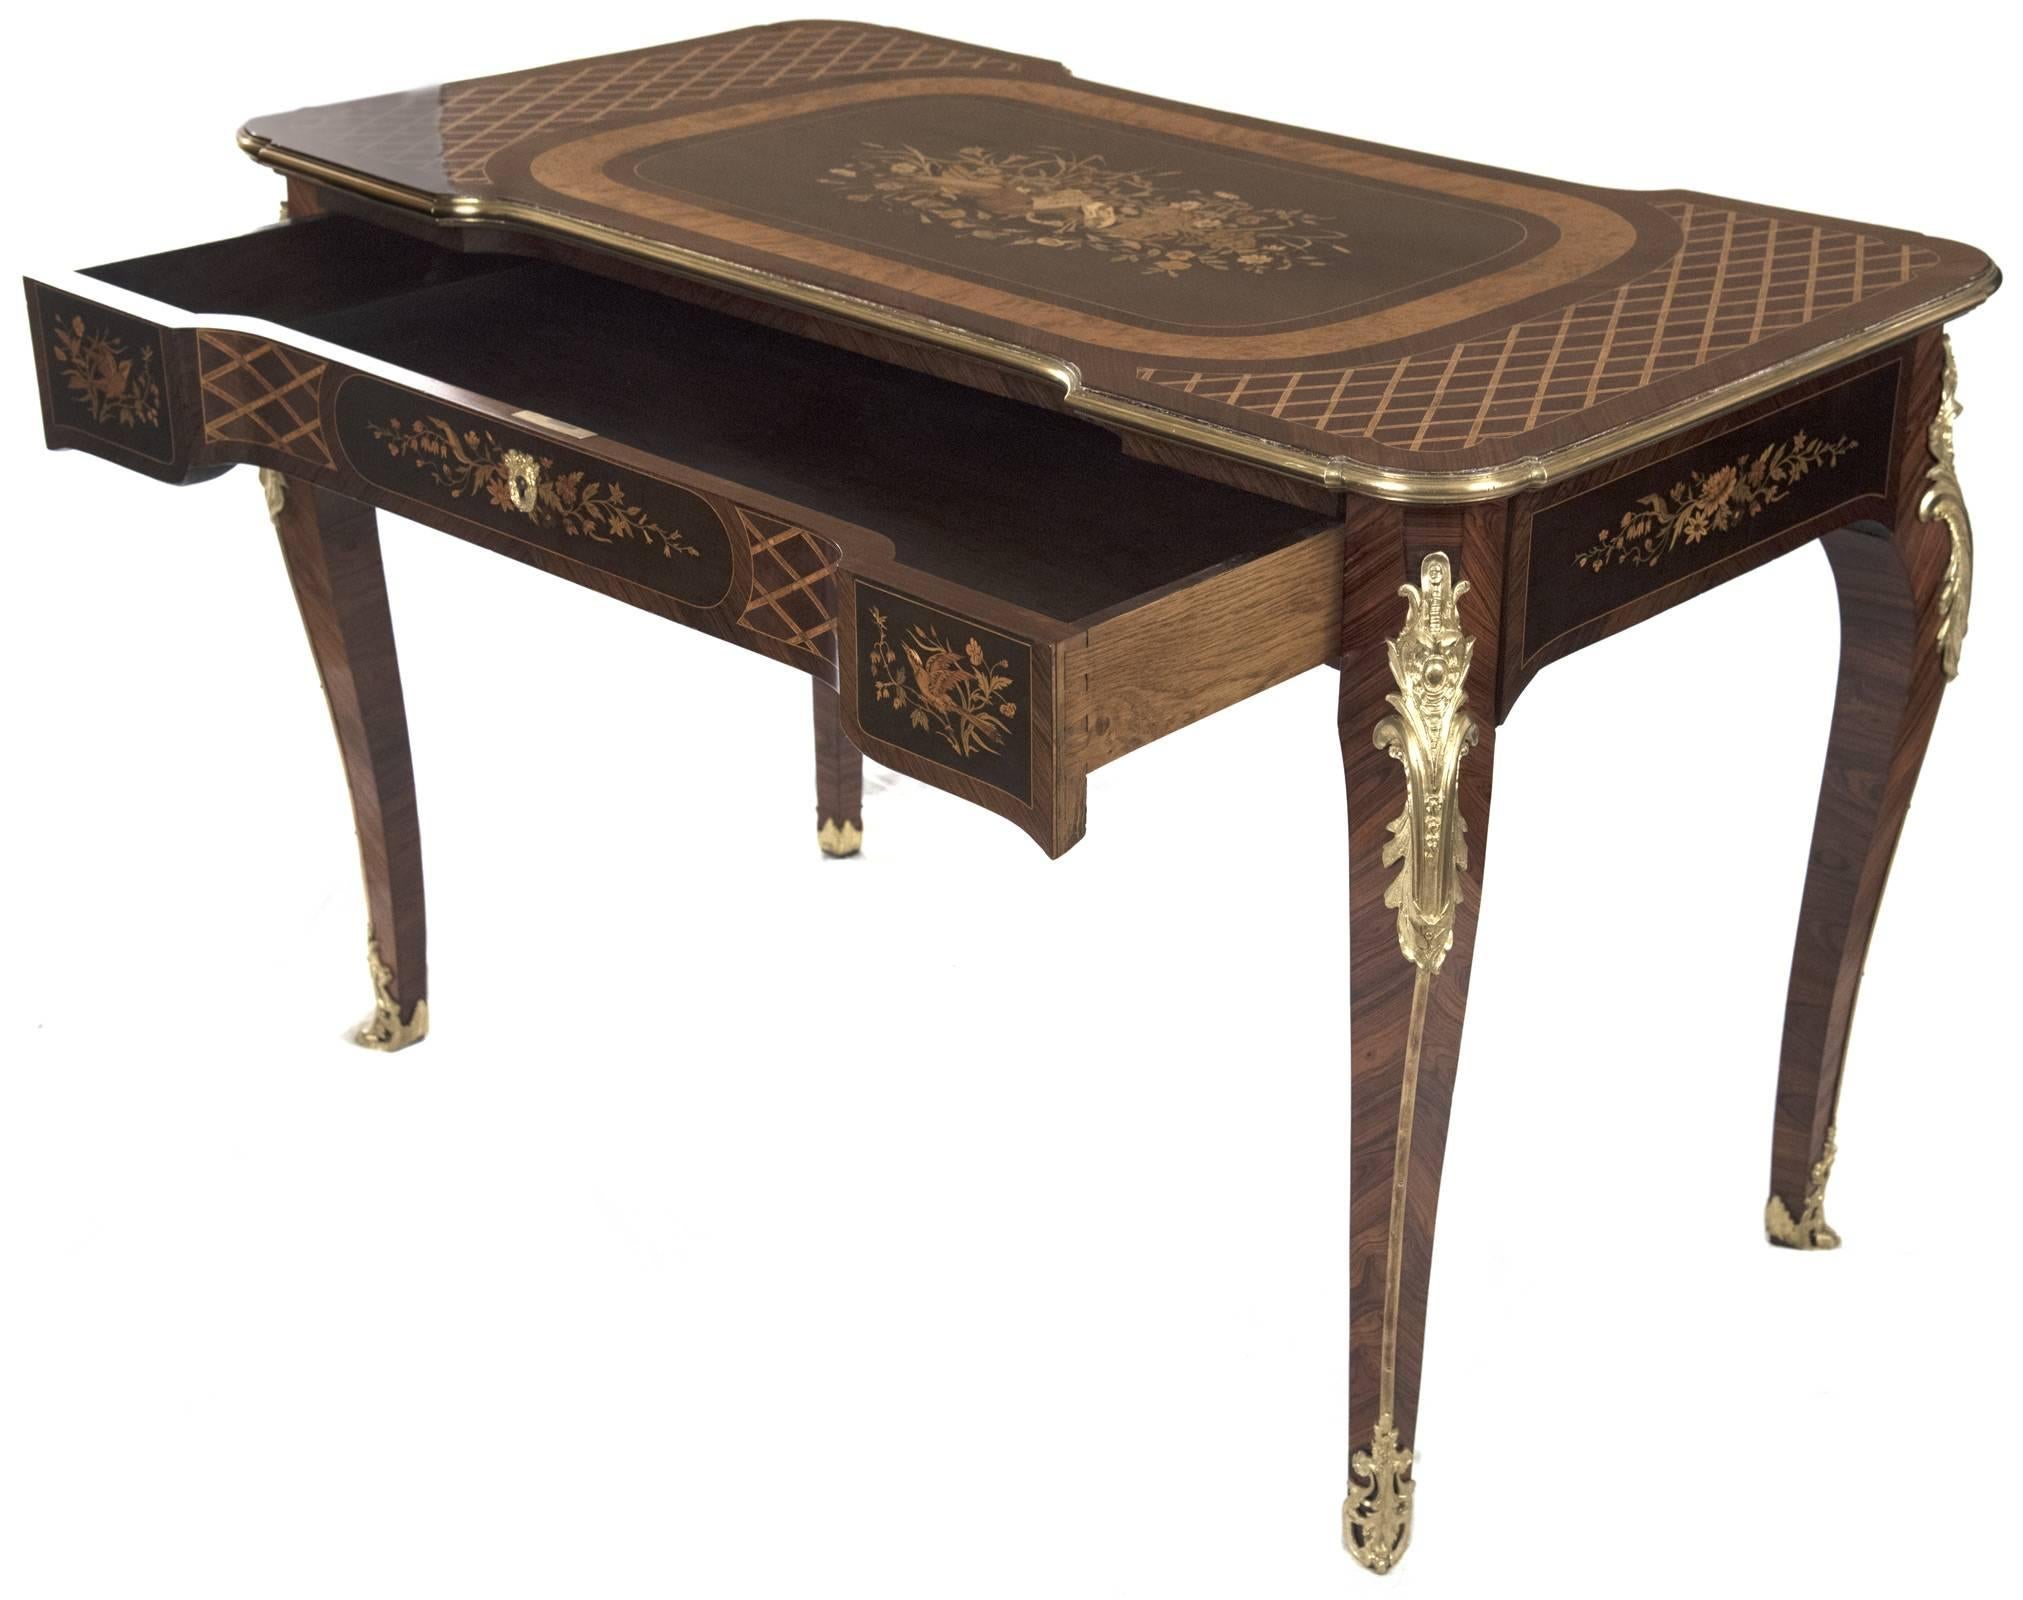 19th Century, French, Louis XV Style Marquetry Bureau Plat with Bronze Mounts In Good Condition For Sale In Salt Lake City, UT